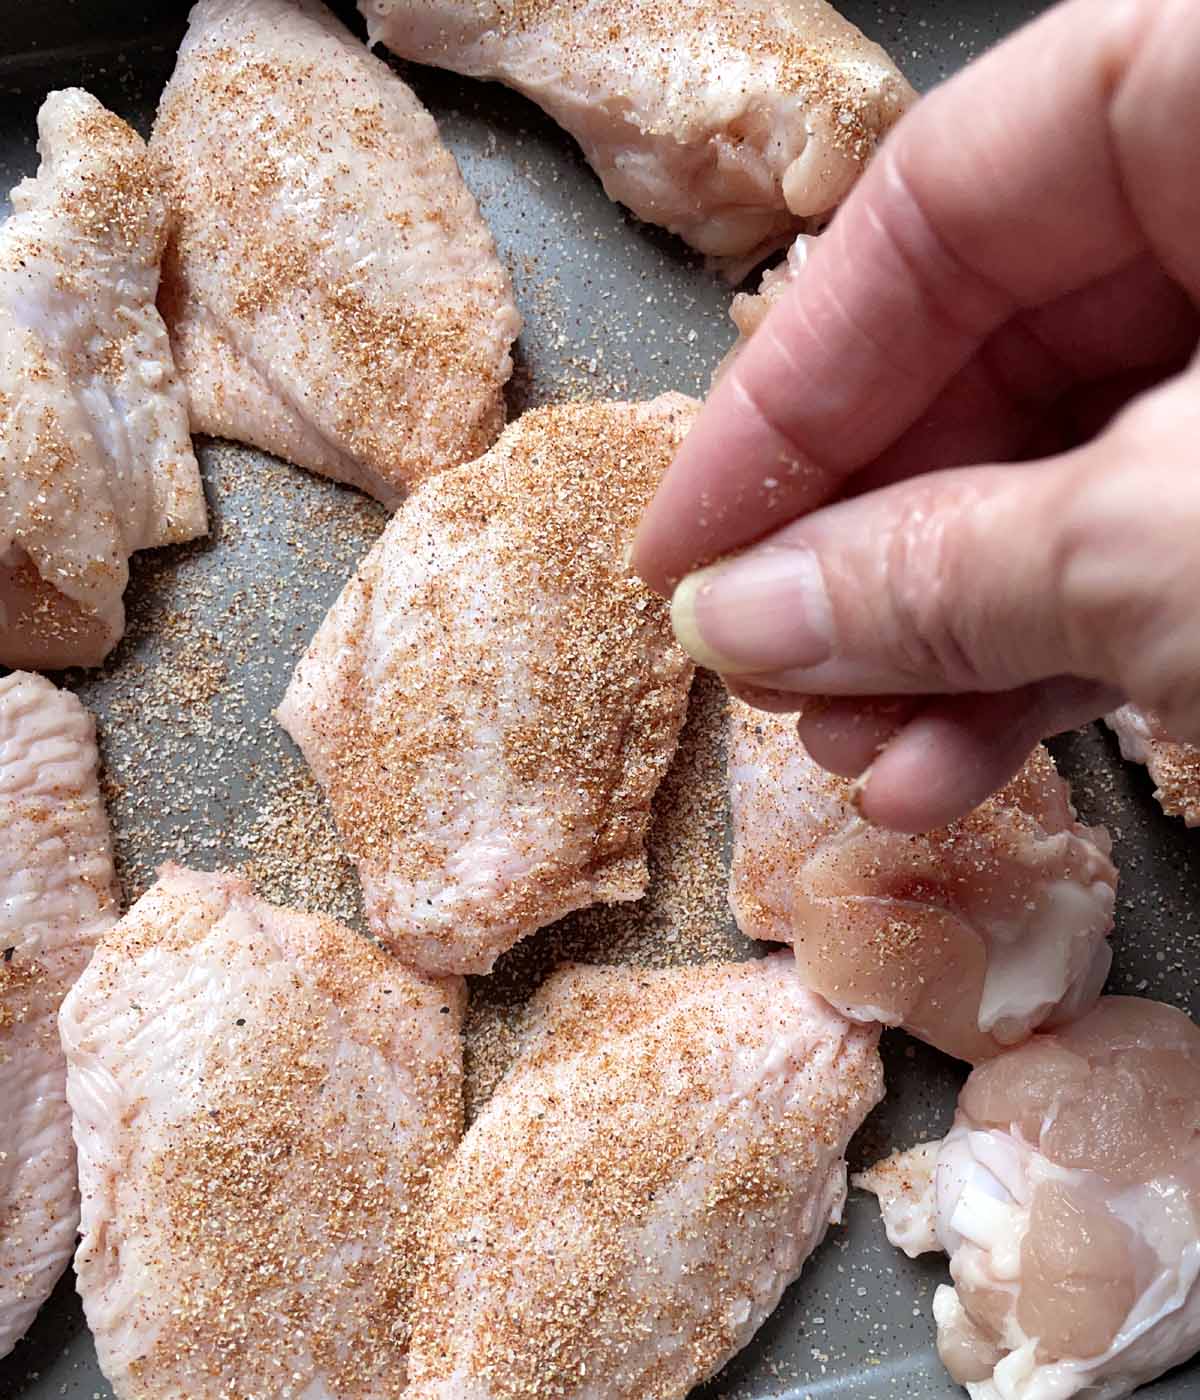 A hand sprinkling brown spices over raw chicken wings in a pan.